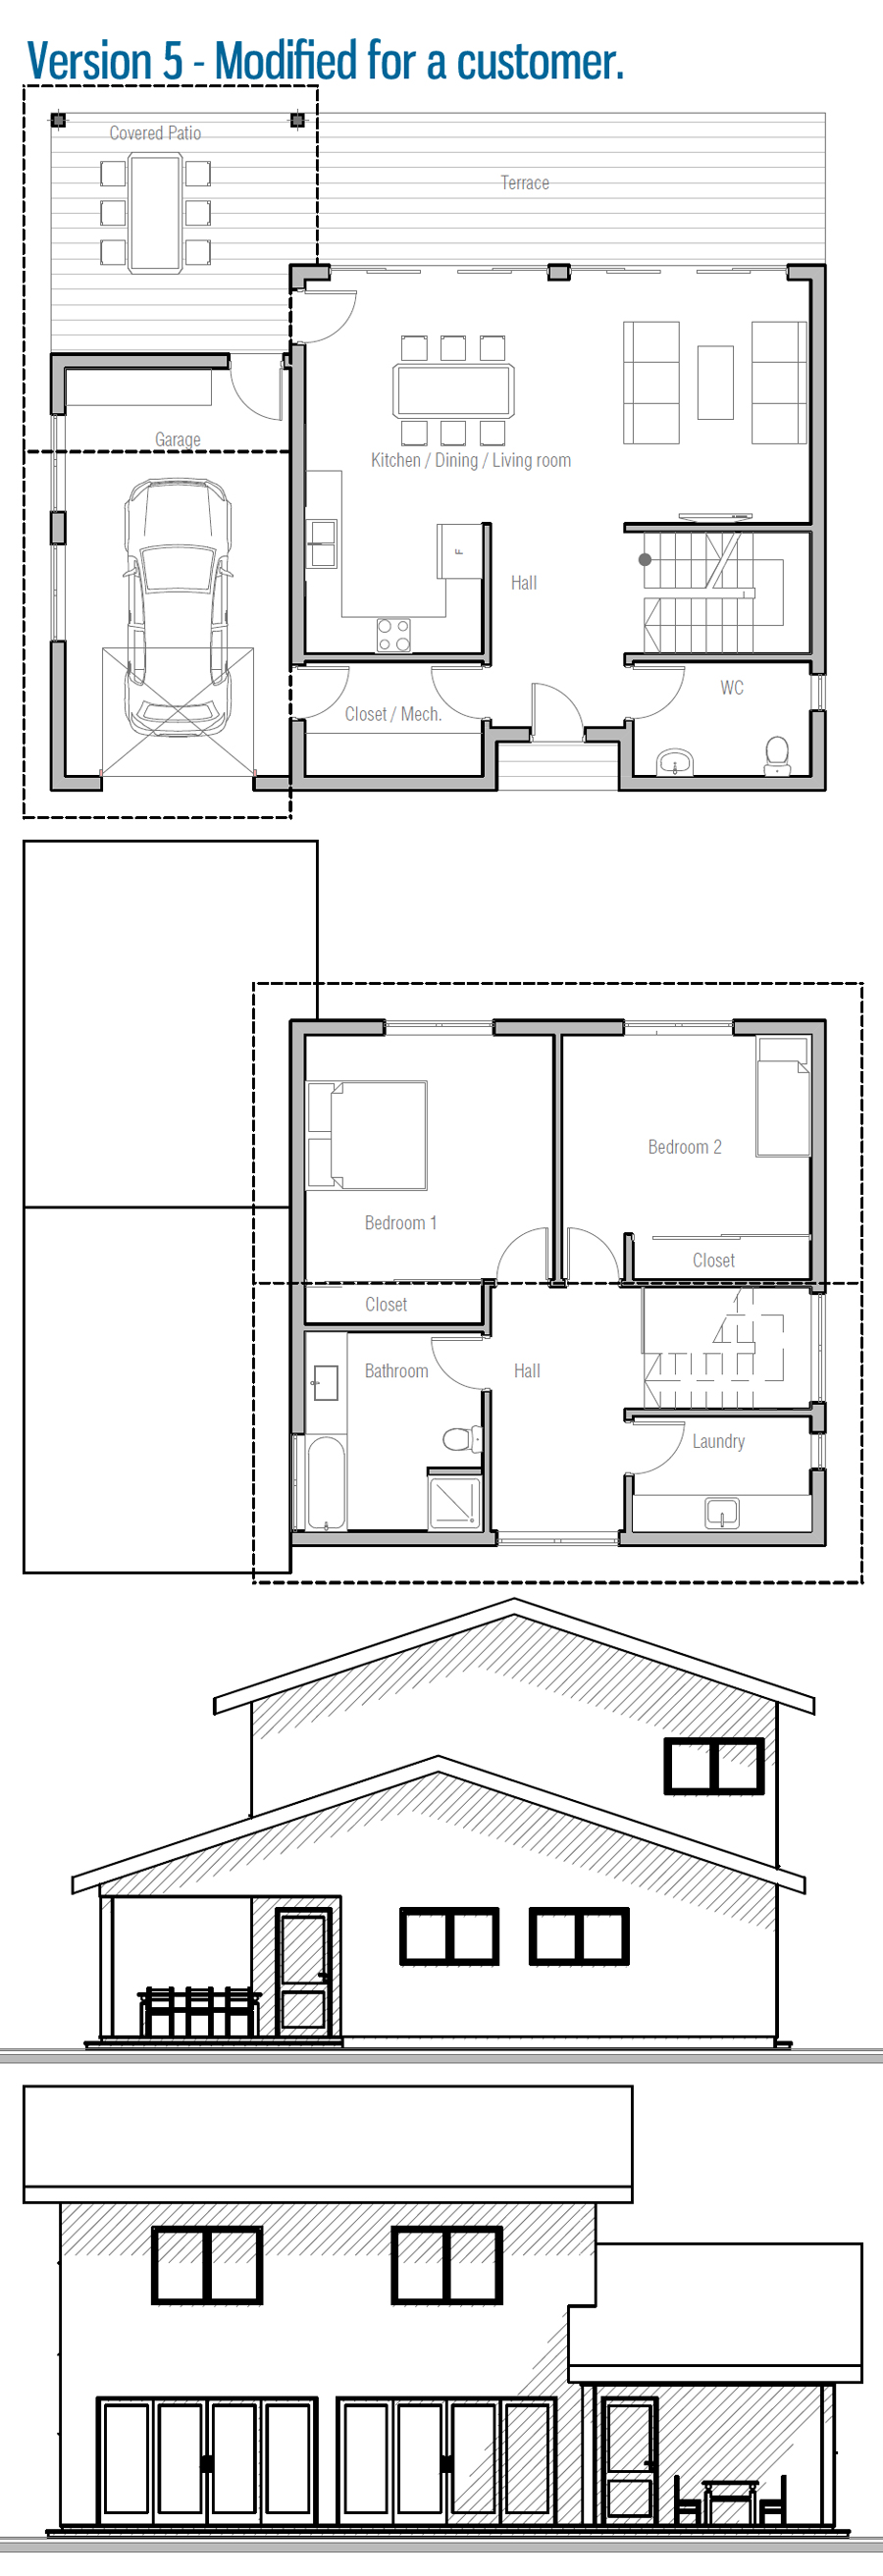 cost-to-build-less-than-100-000_13_HOUSE_PLAN_CH350_V5.jpg